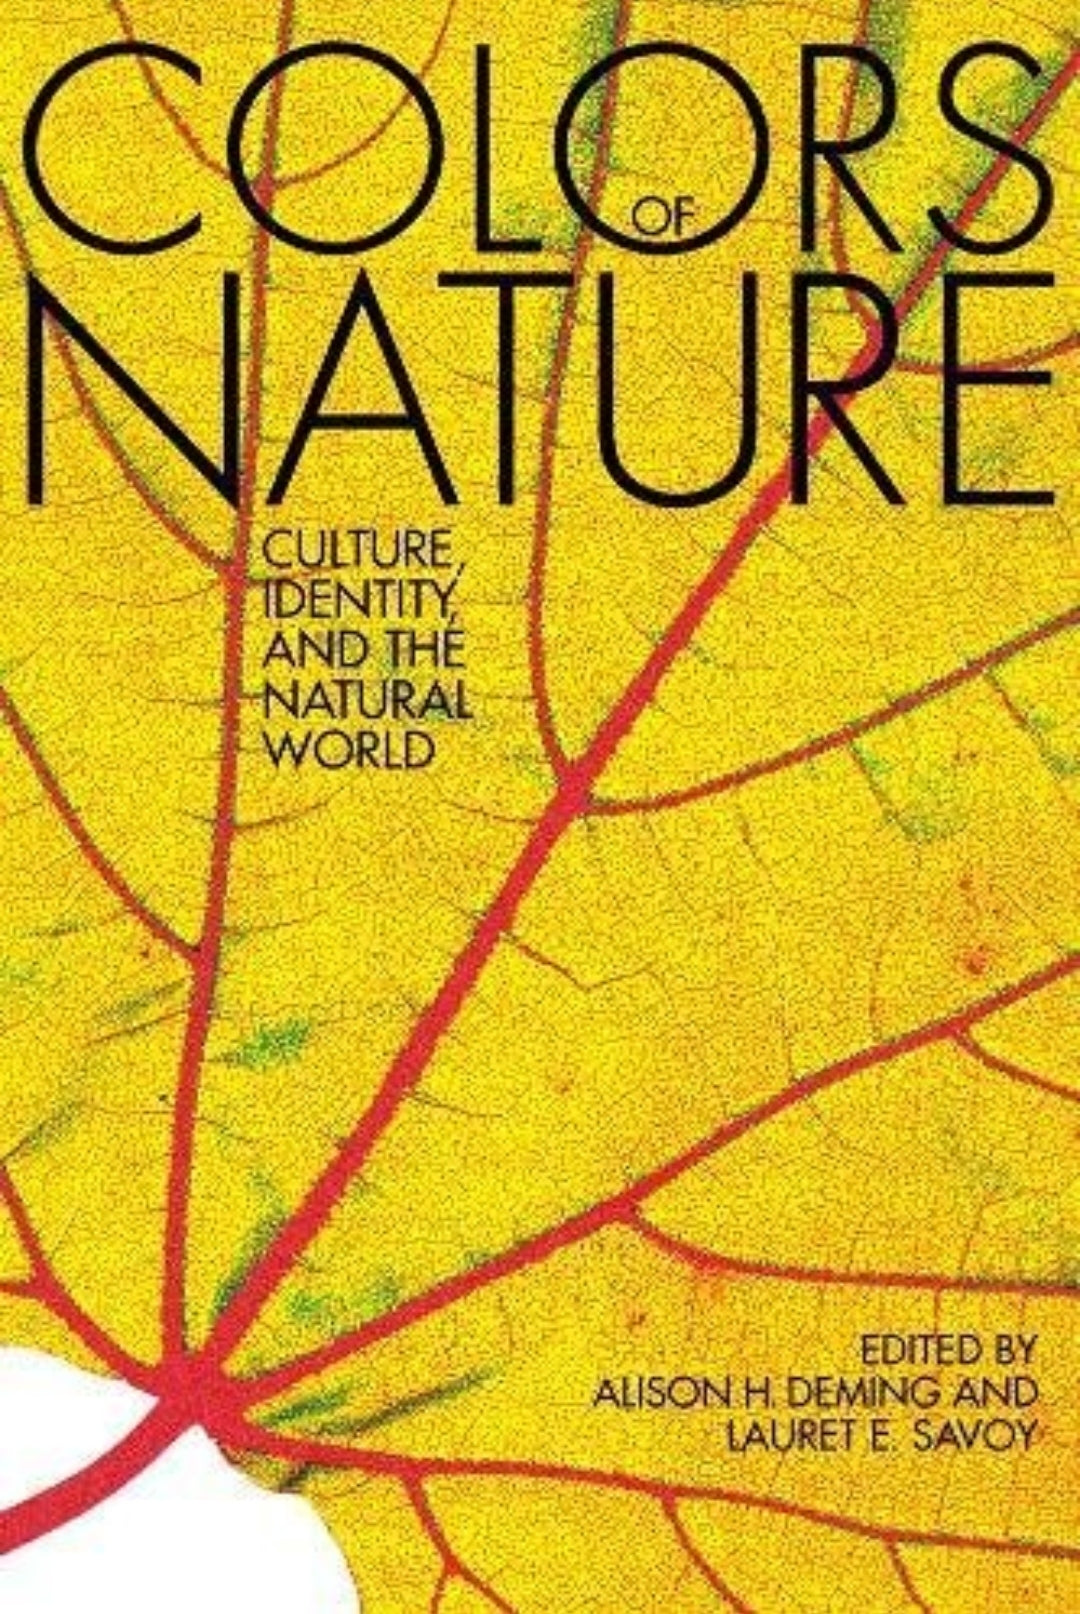 The Colors of Nature: Culture Identity And The Natural World edited by Alison H. Deming and Lauret E. Savoy